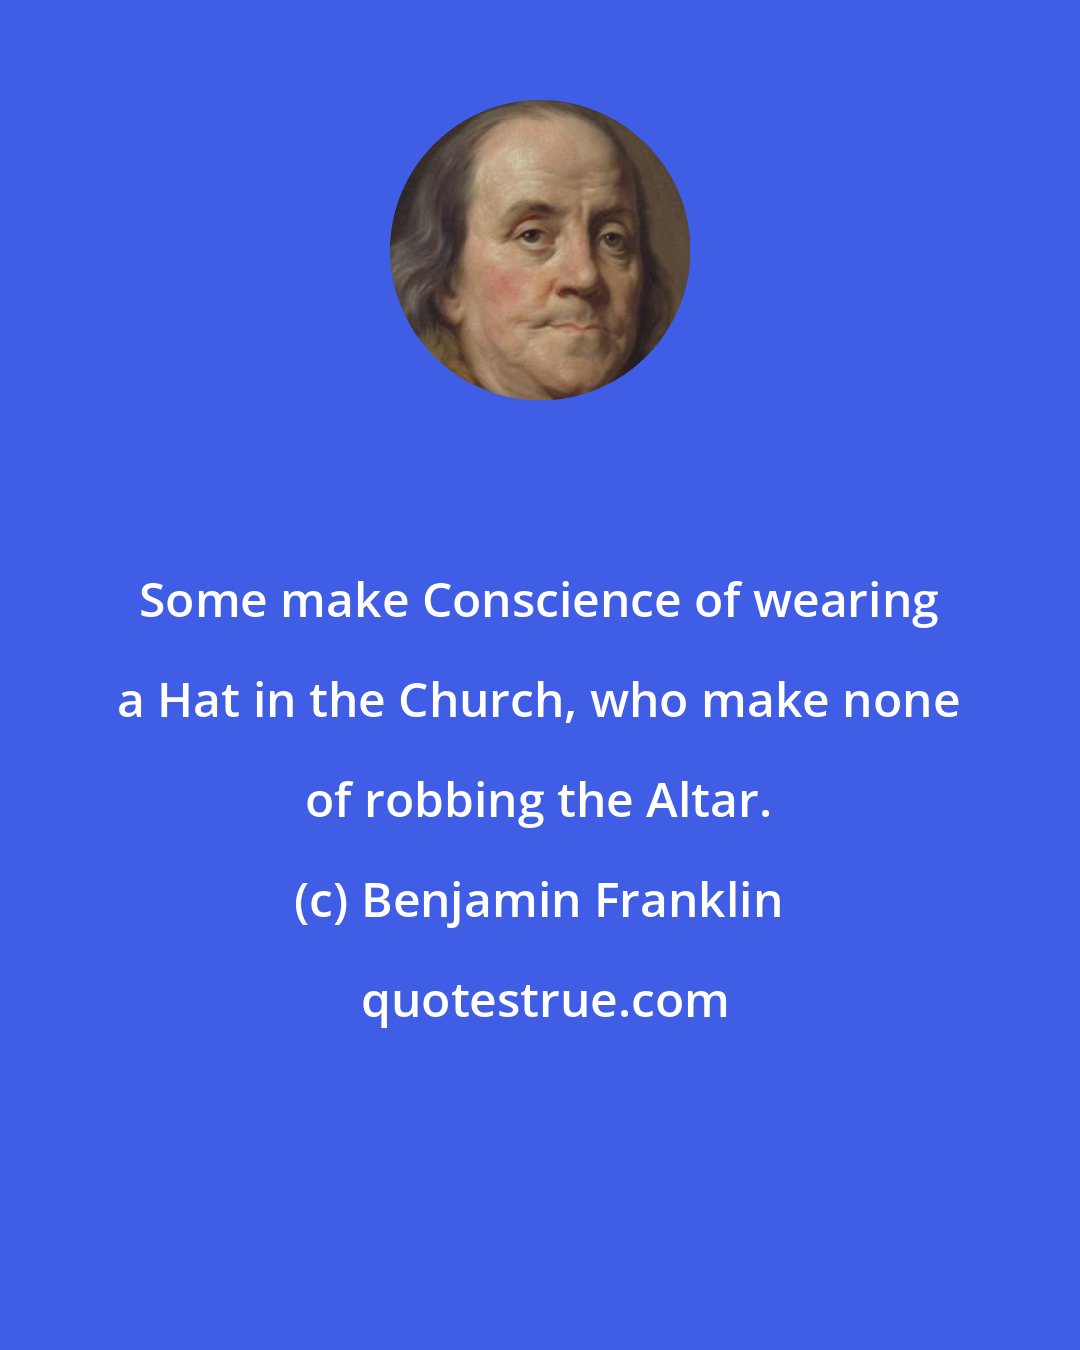 Benjamin Franklin: Some make Conscience of wearing a Hat in the Church, who make none of robbing the Altar.